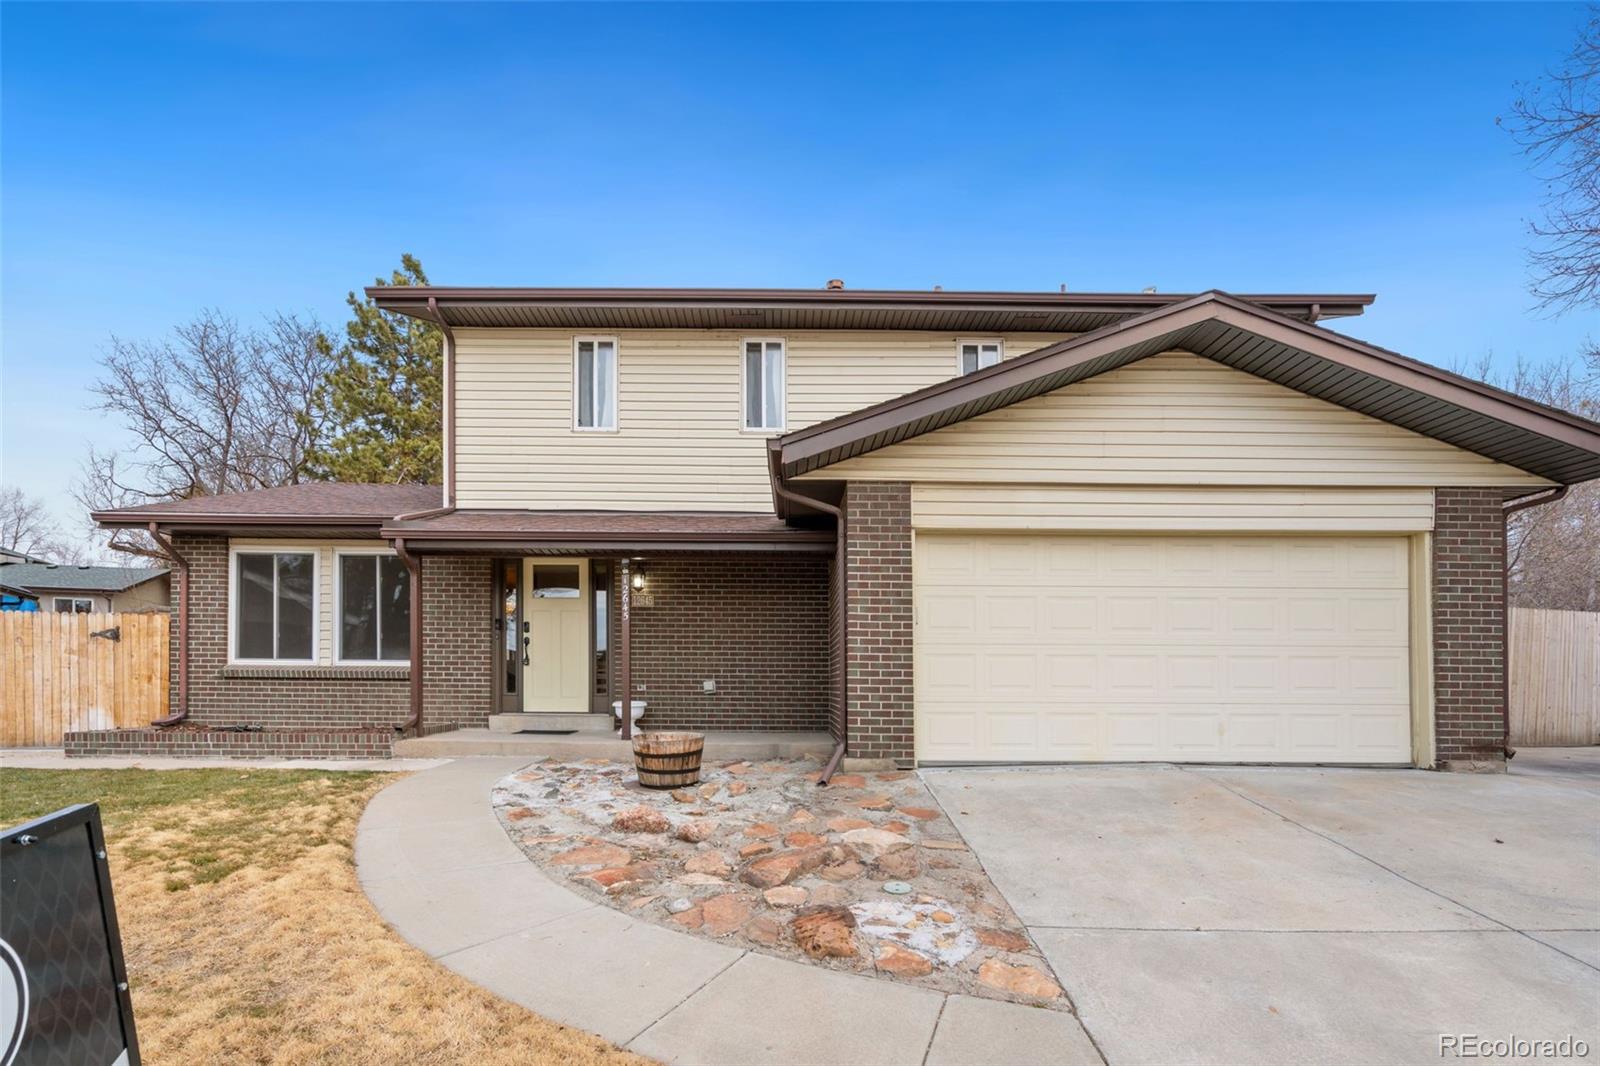 12645 W 66th Place, arvada MLS: 2935107 Beds: 4 Baths: 4 Price: $675,000